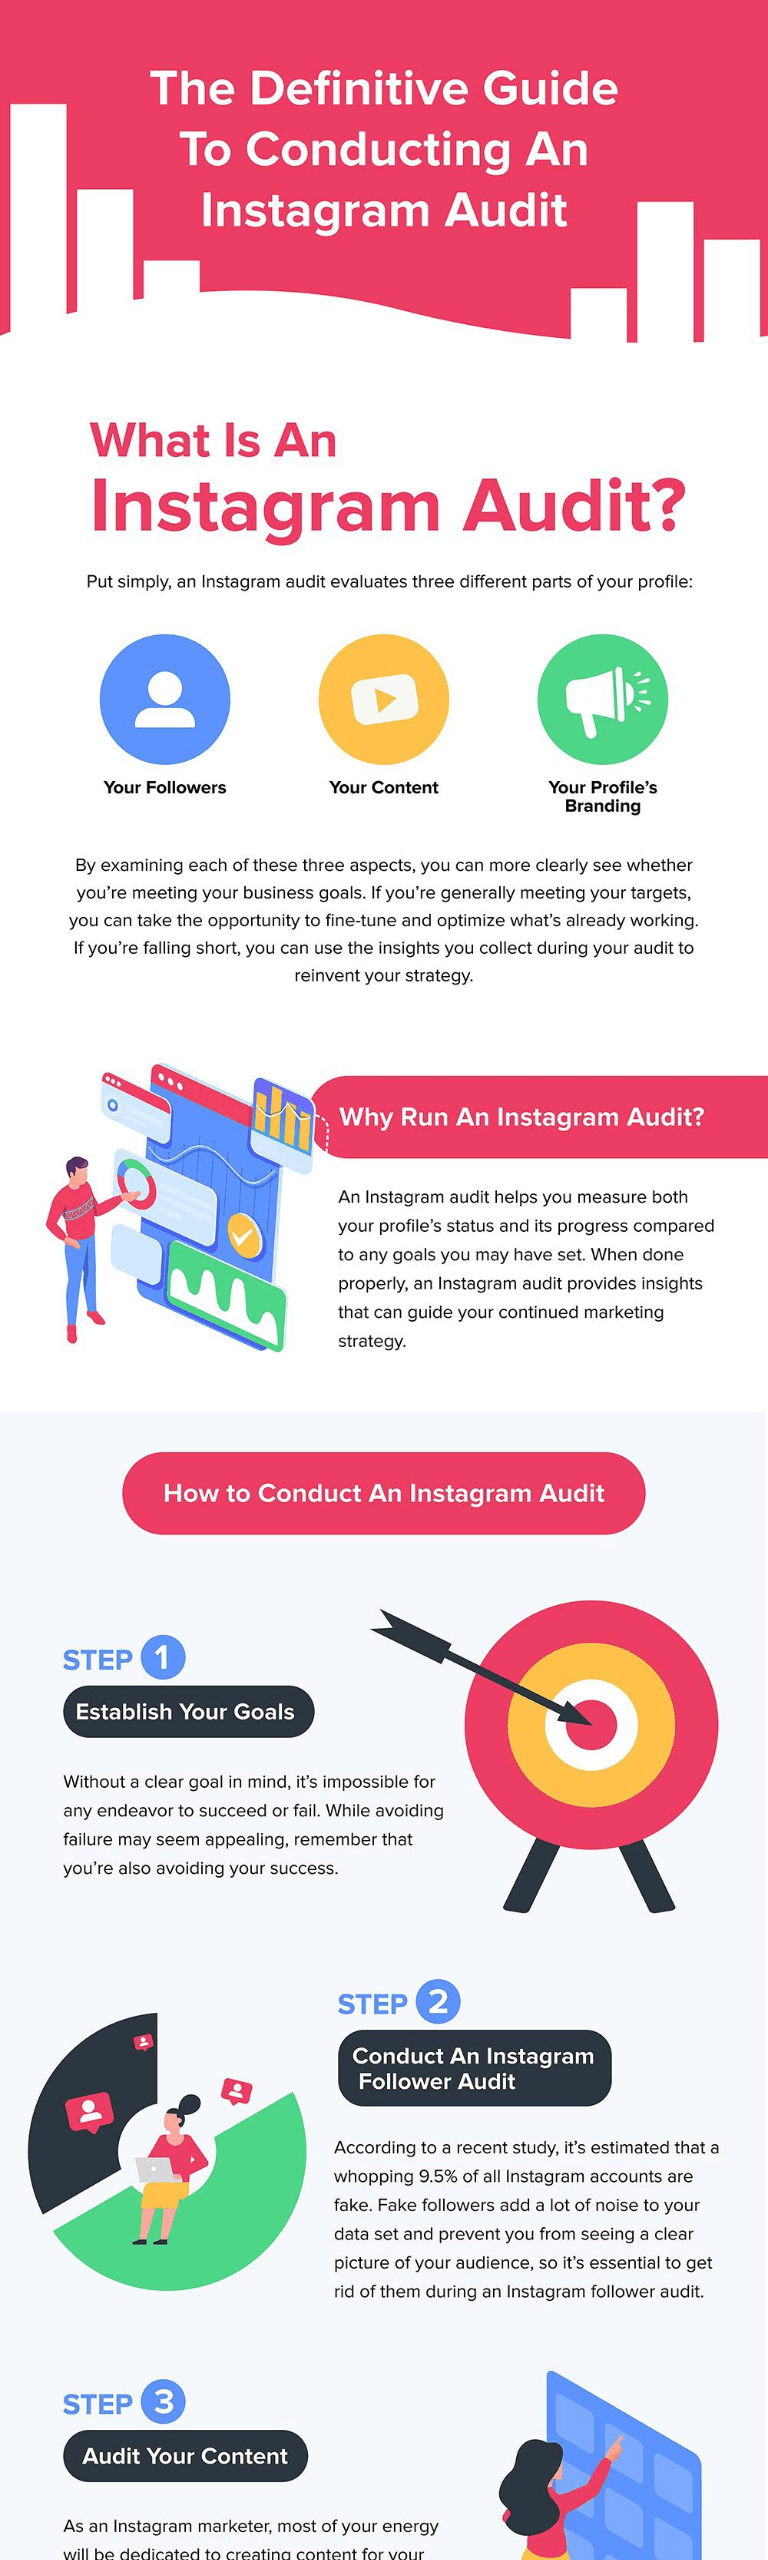 The Definitive Guide To Conducting An Instagram Audit